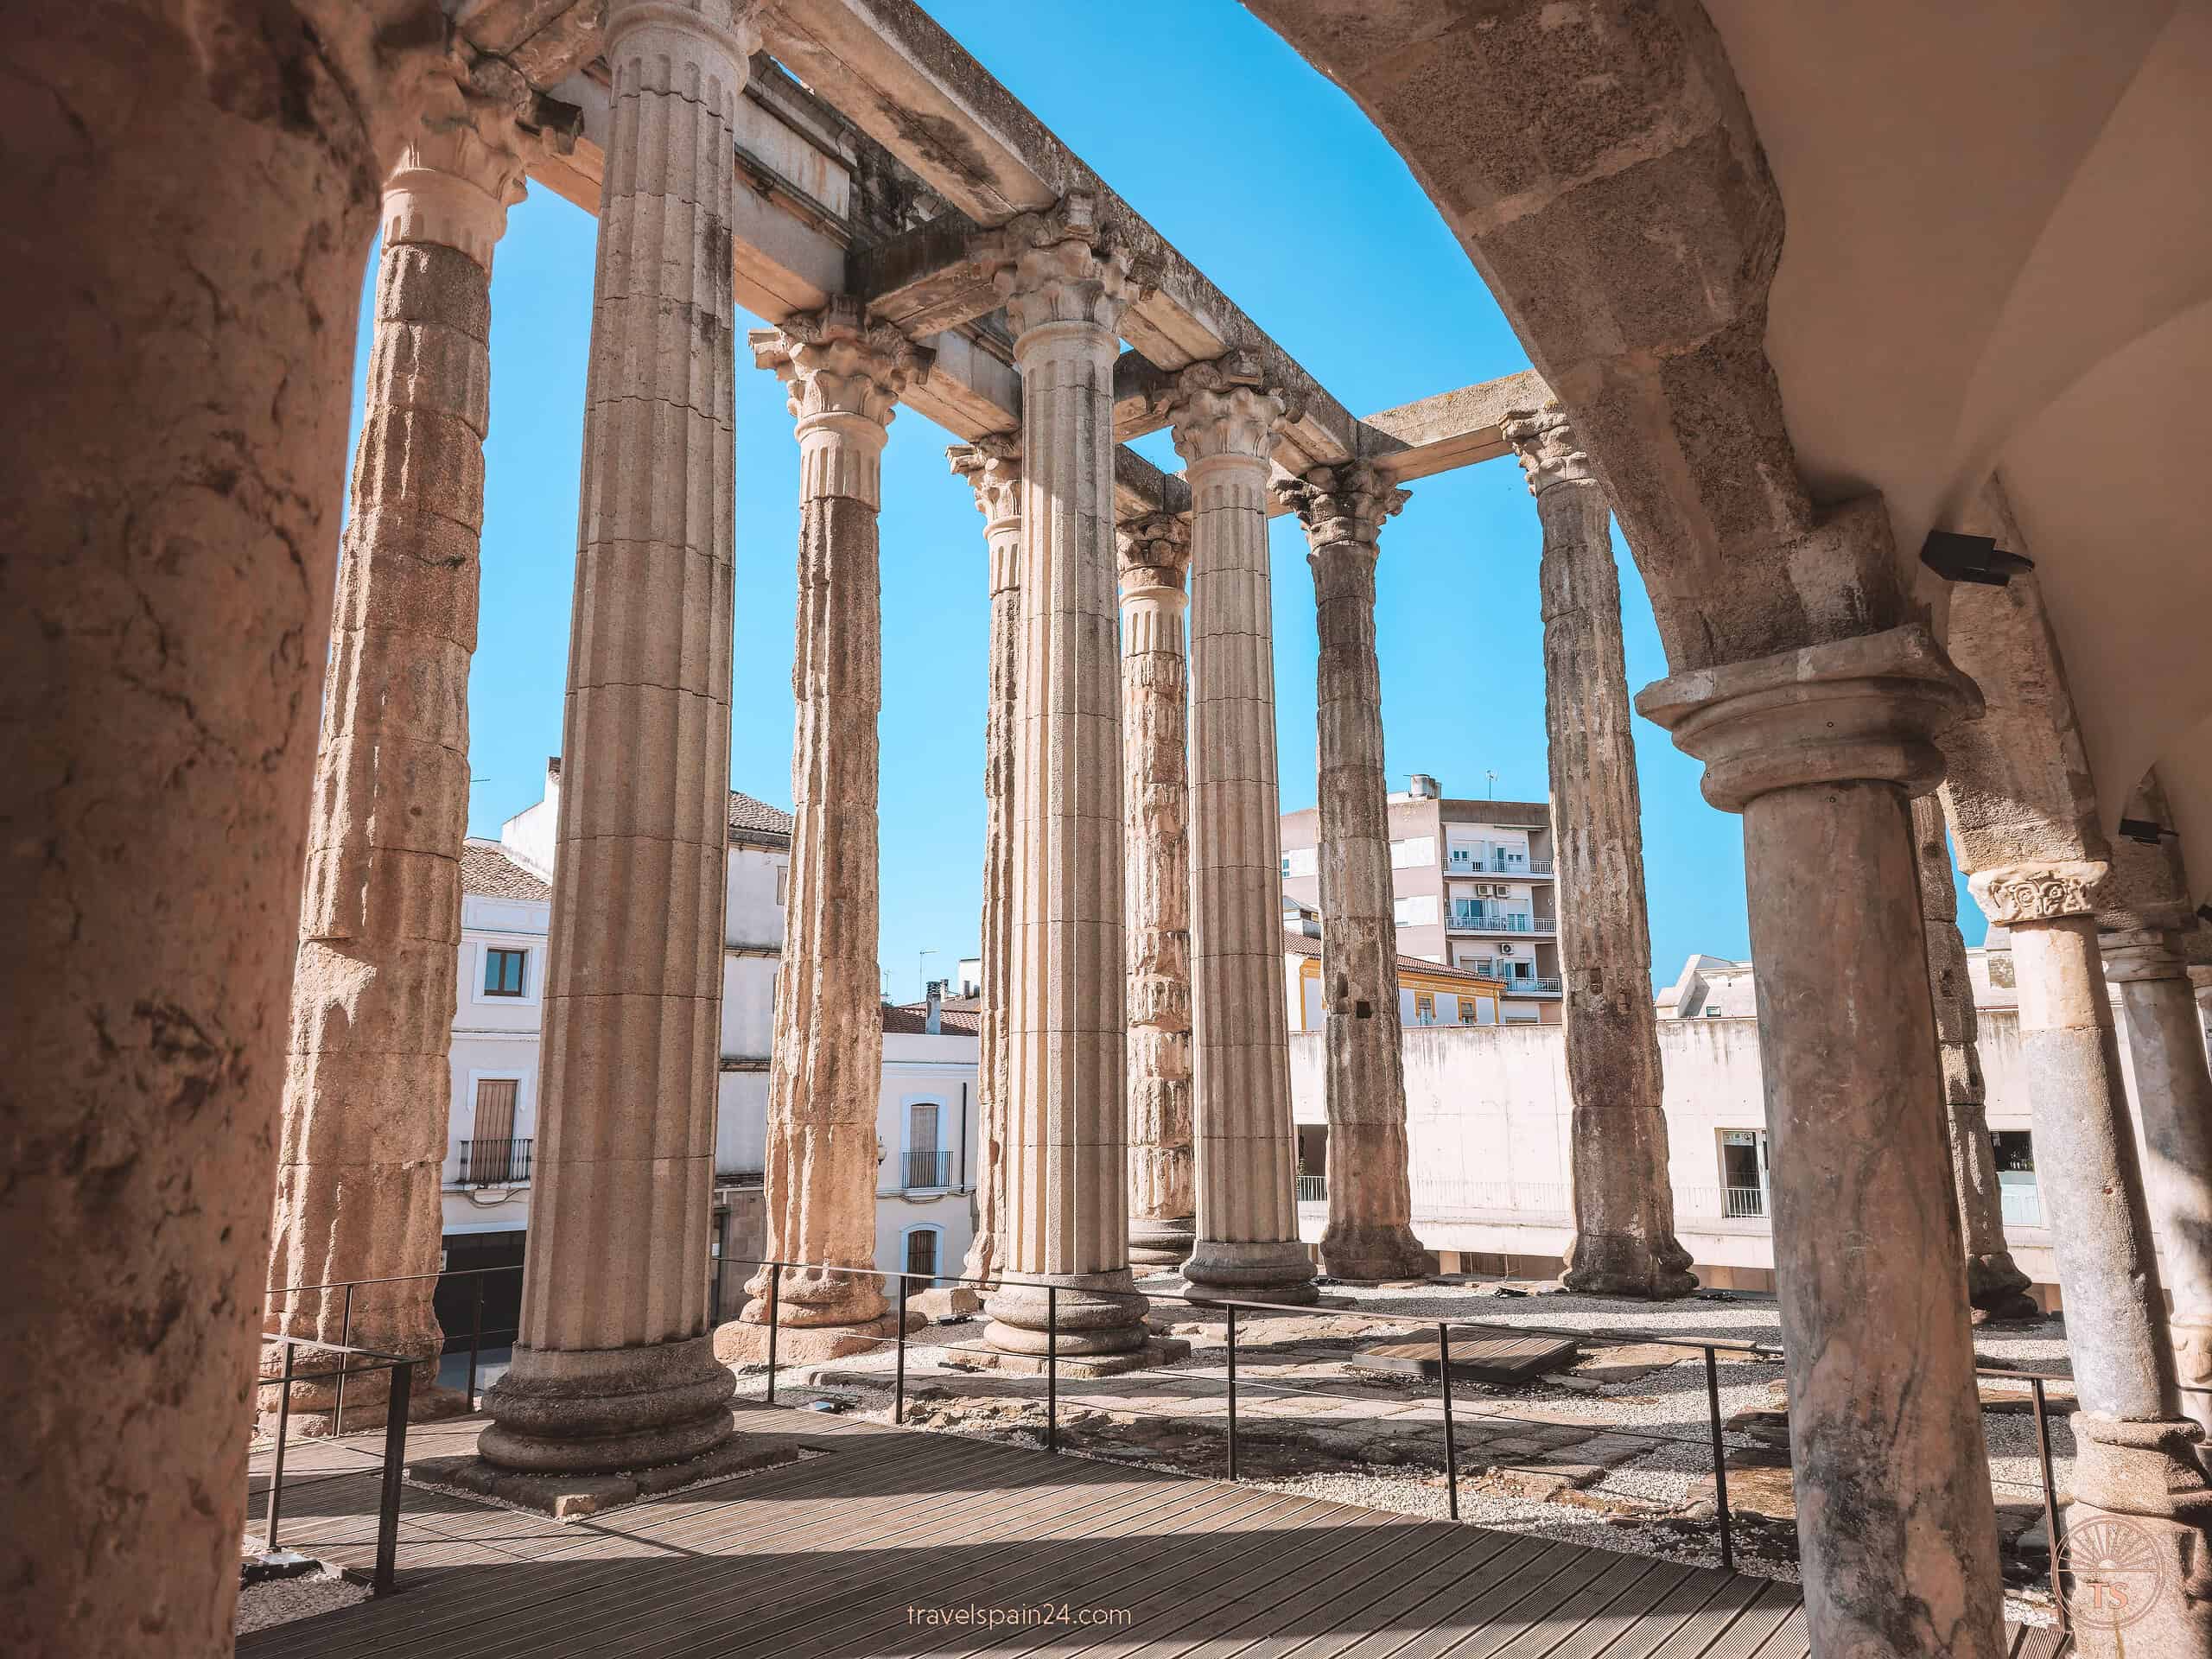 The imposing pillars of the Temple of Diana in Mérida, towering over five meters high under a sunny blue sky, reflecting the city's rich Roman heritage.